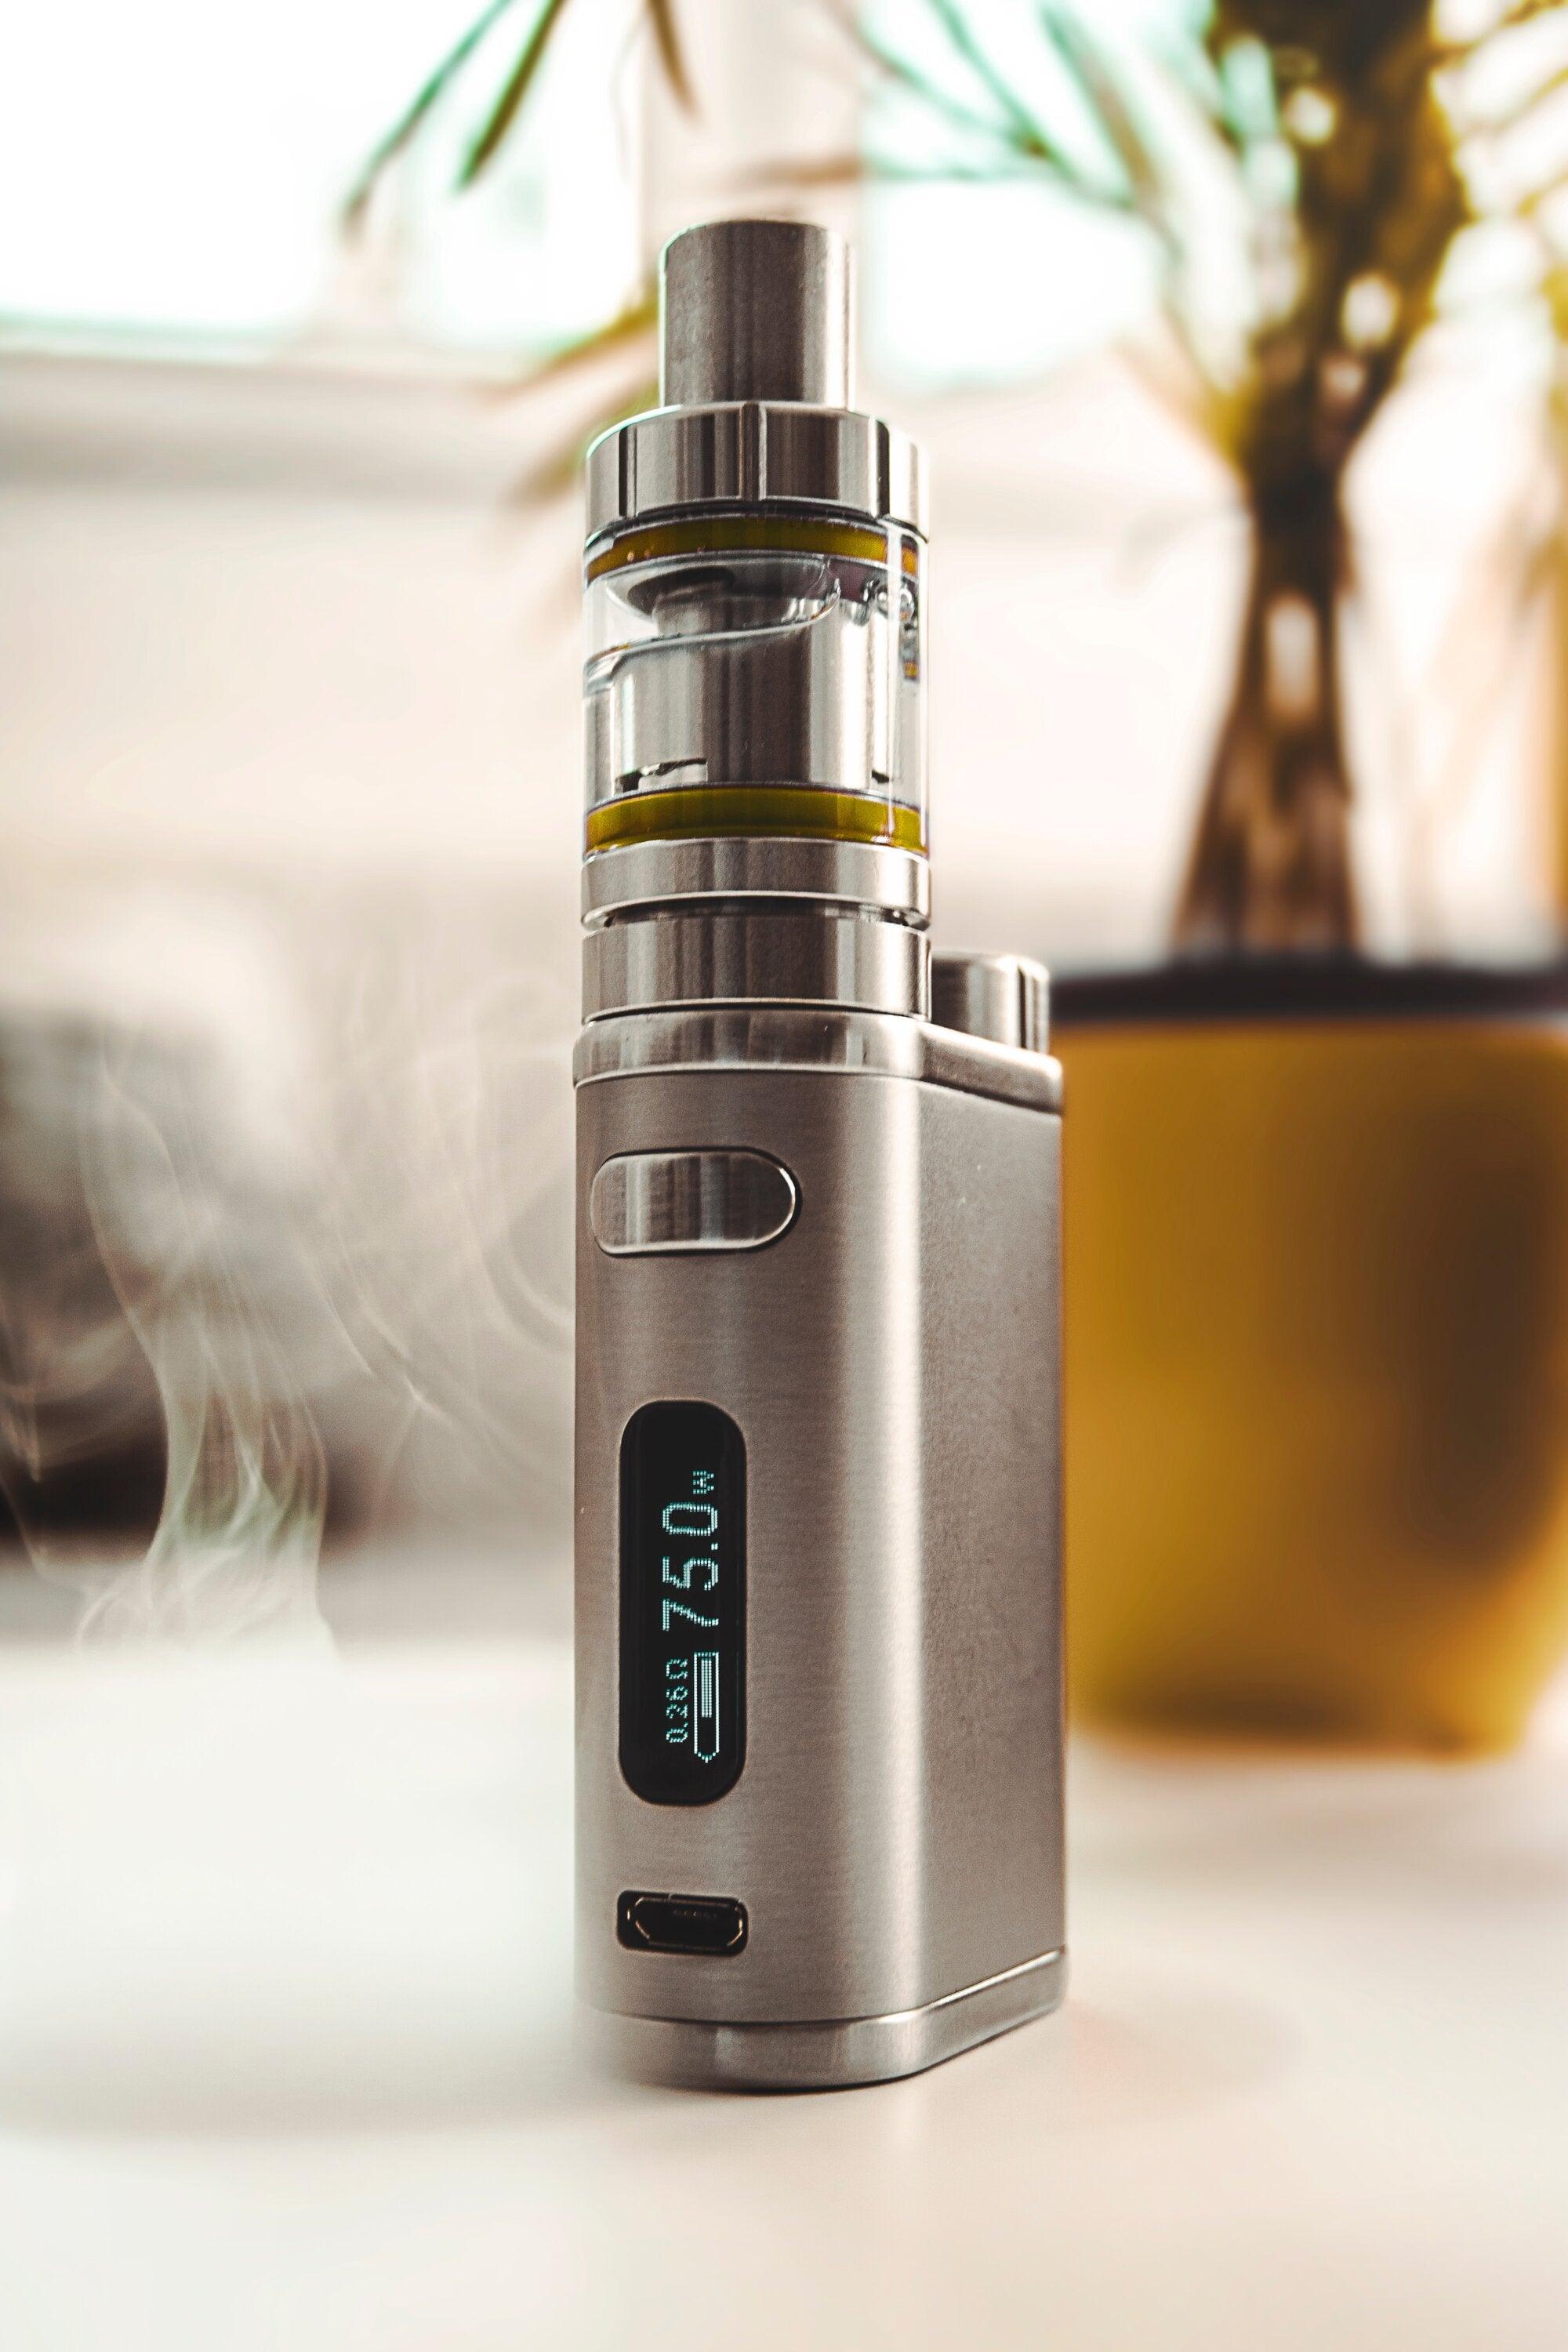 What Are the Key Features That Make Box Mod Vape Kits Special? - V8PR.uk